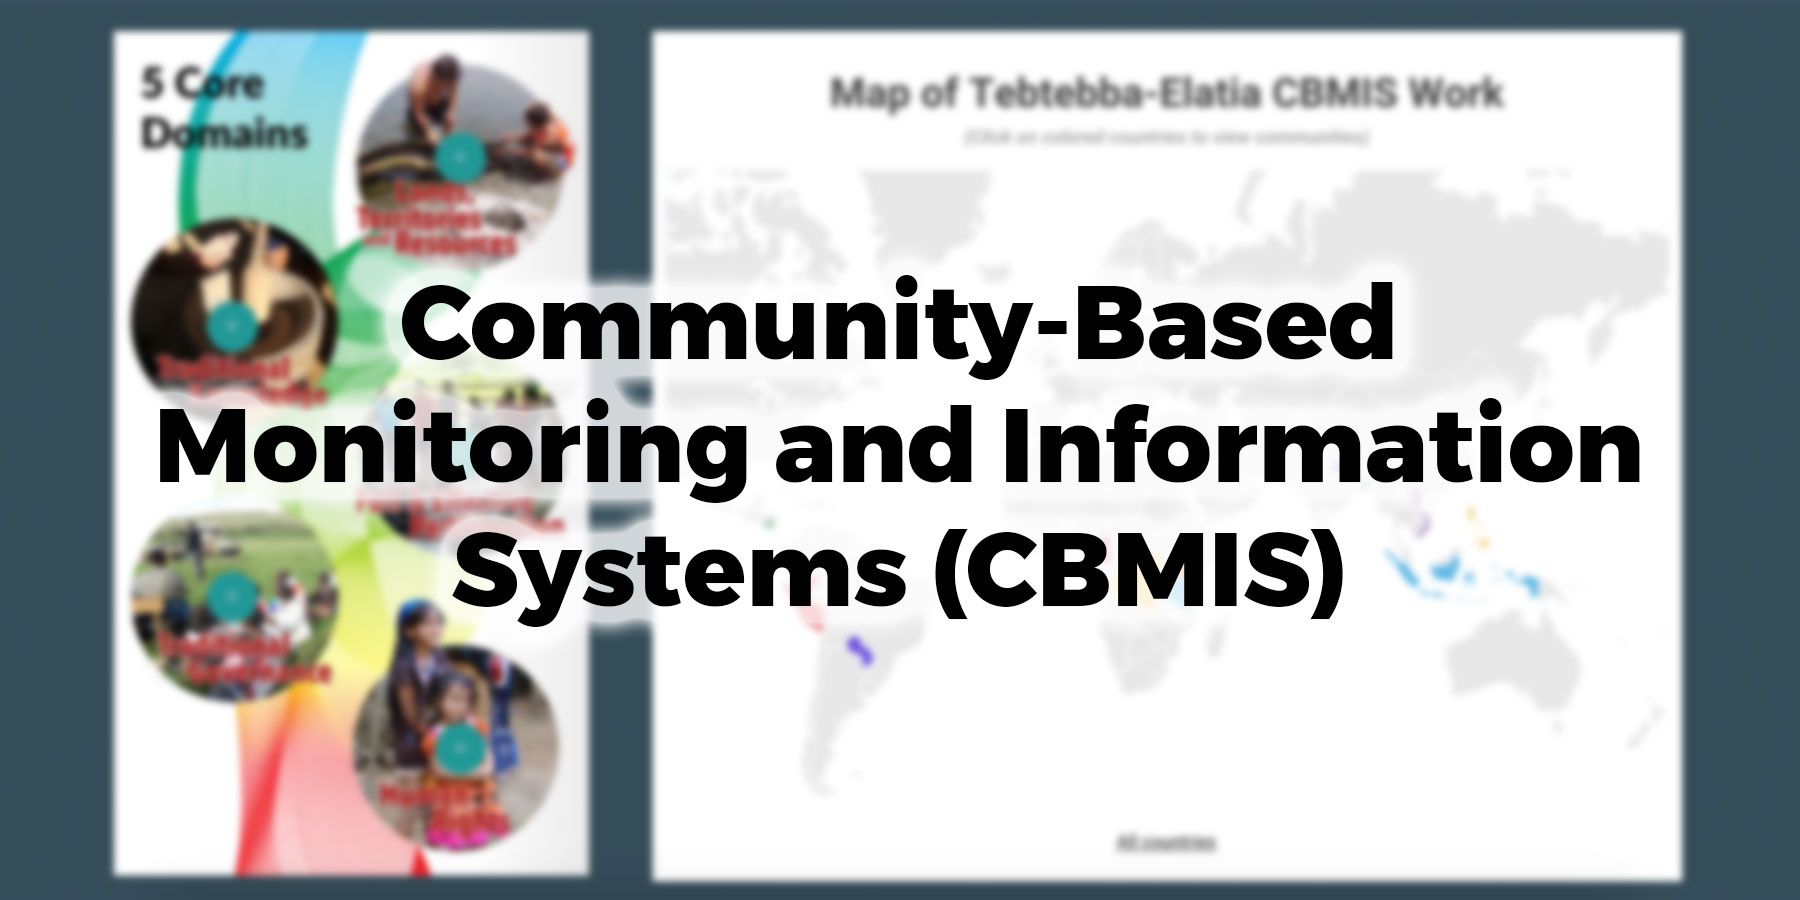 Community-Based Monitoring and Information Systems (CBMIS)